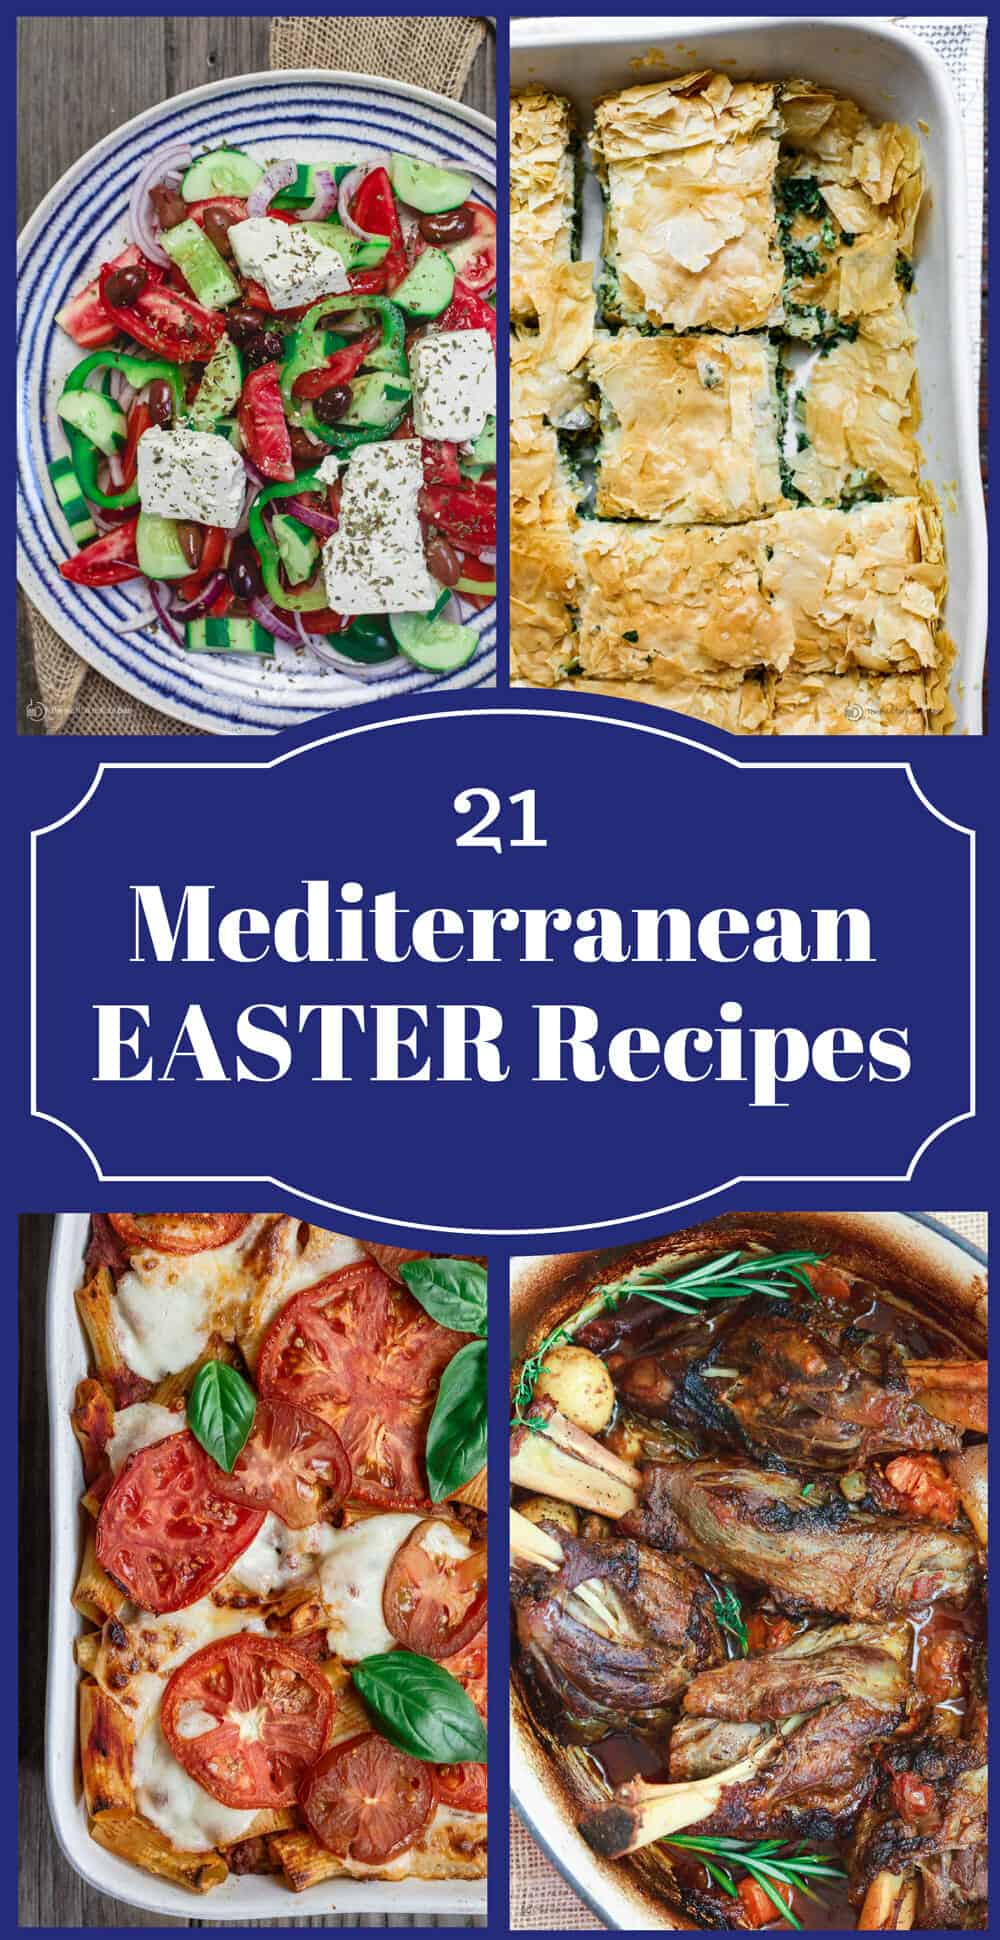 21 All-Star Mediterranean Easter Recipes | The ...